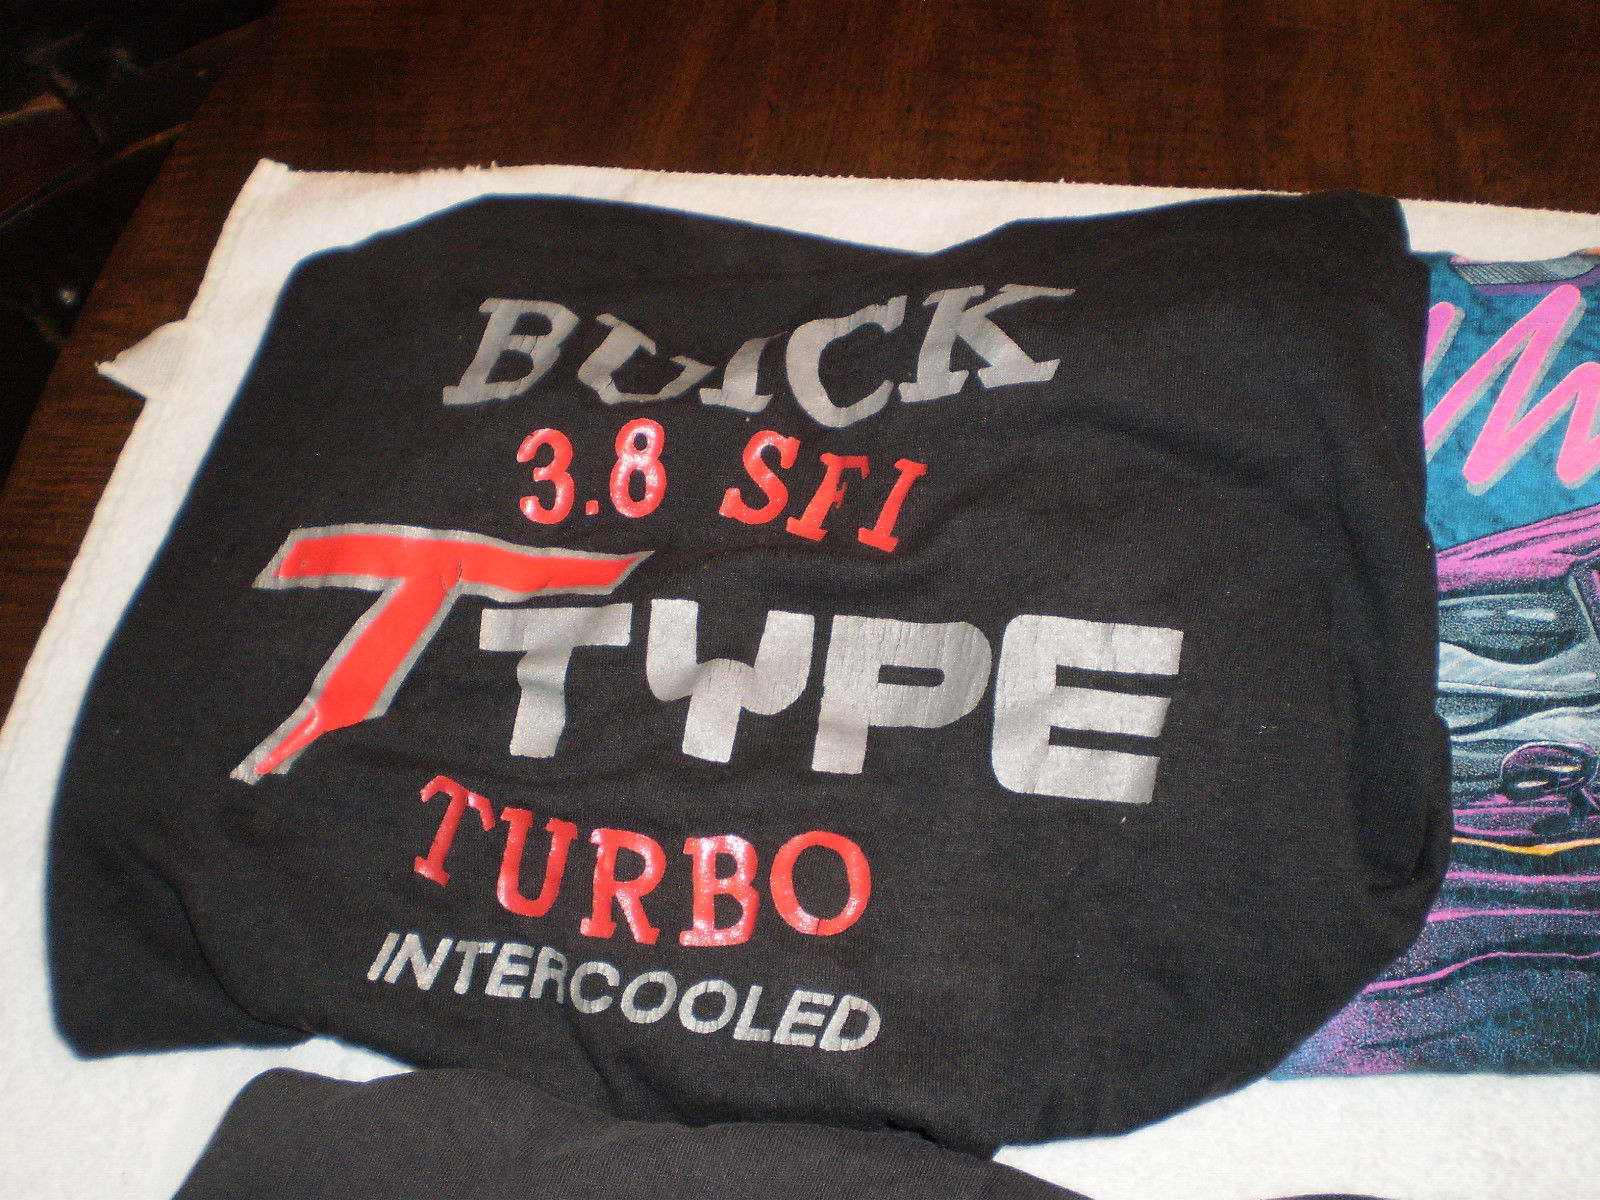 Assorted Turbo Buick Shirts